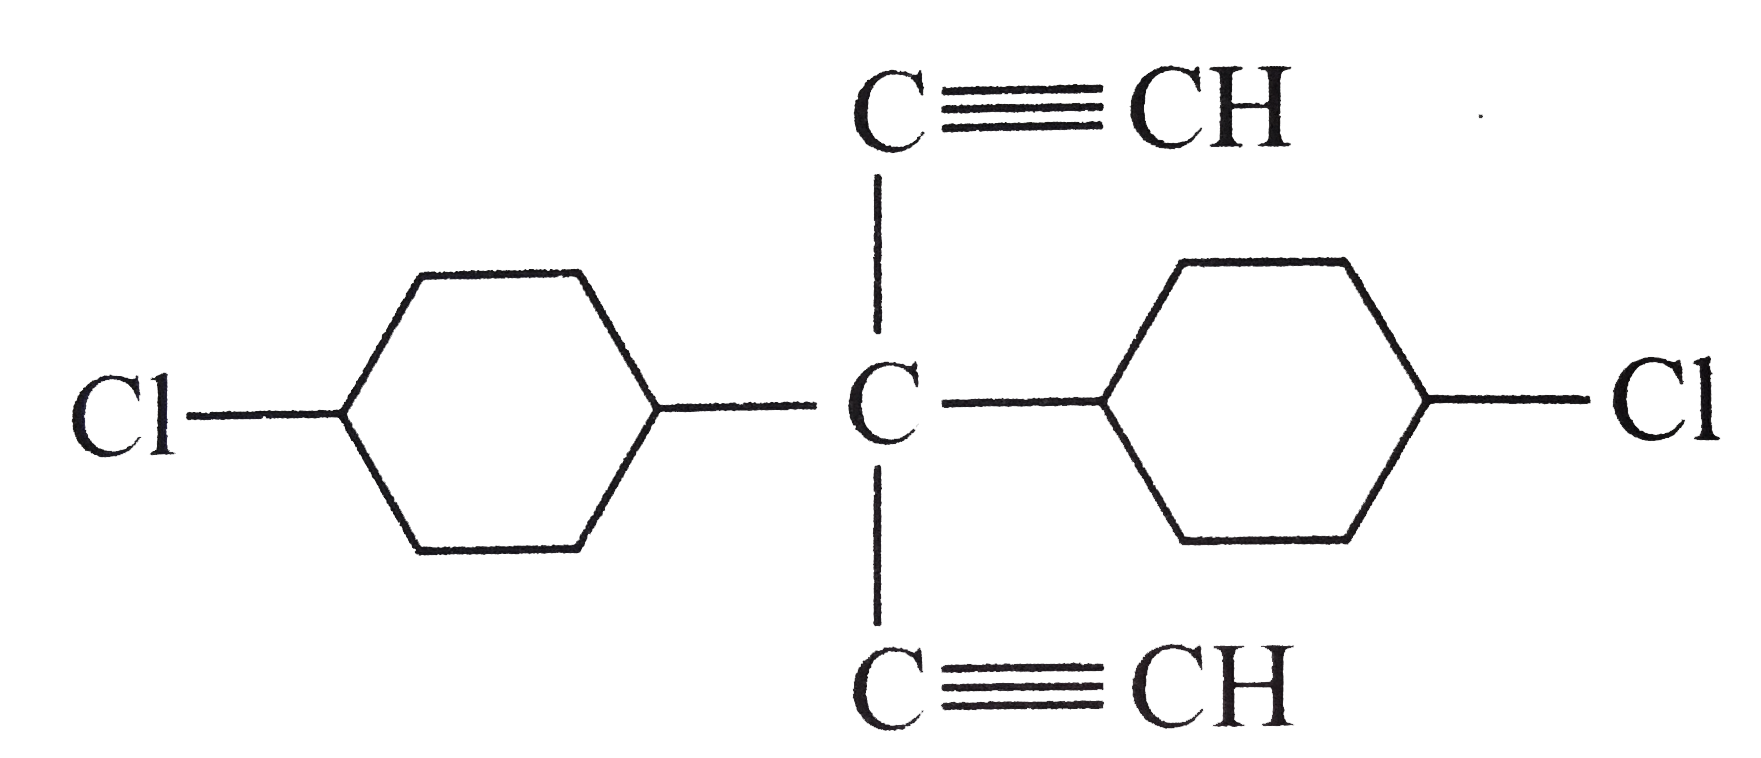 IUPAC  name of the following molecule is